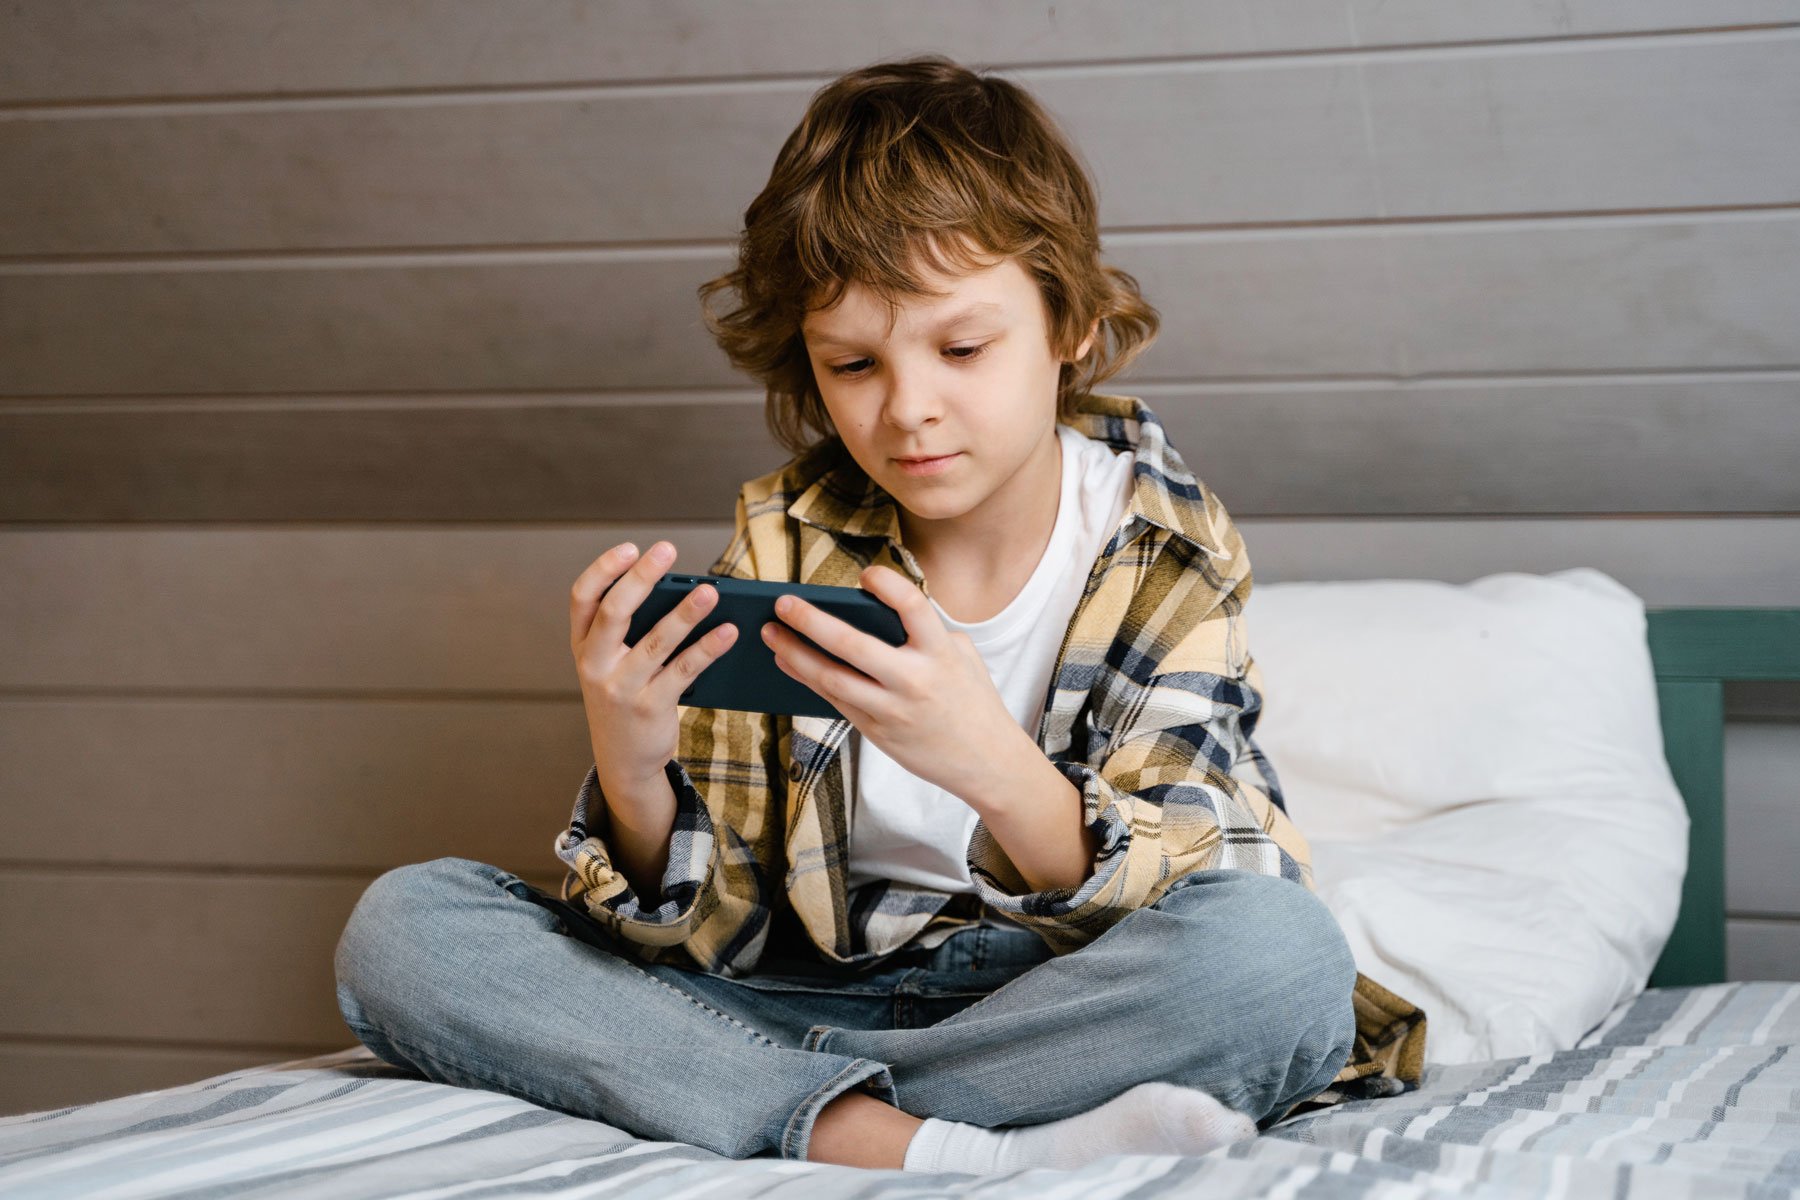 Do You Know What Your Kids Do Online?